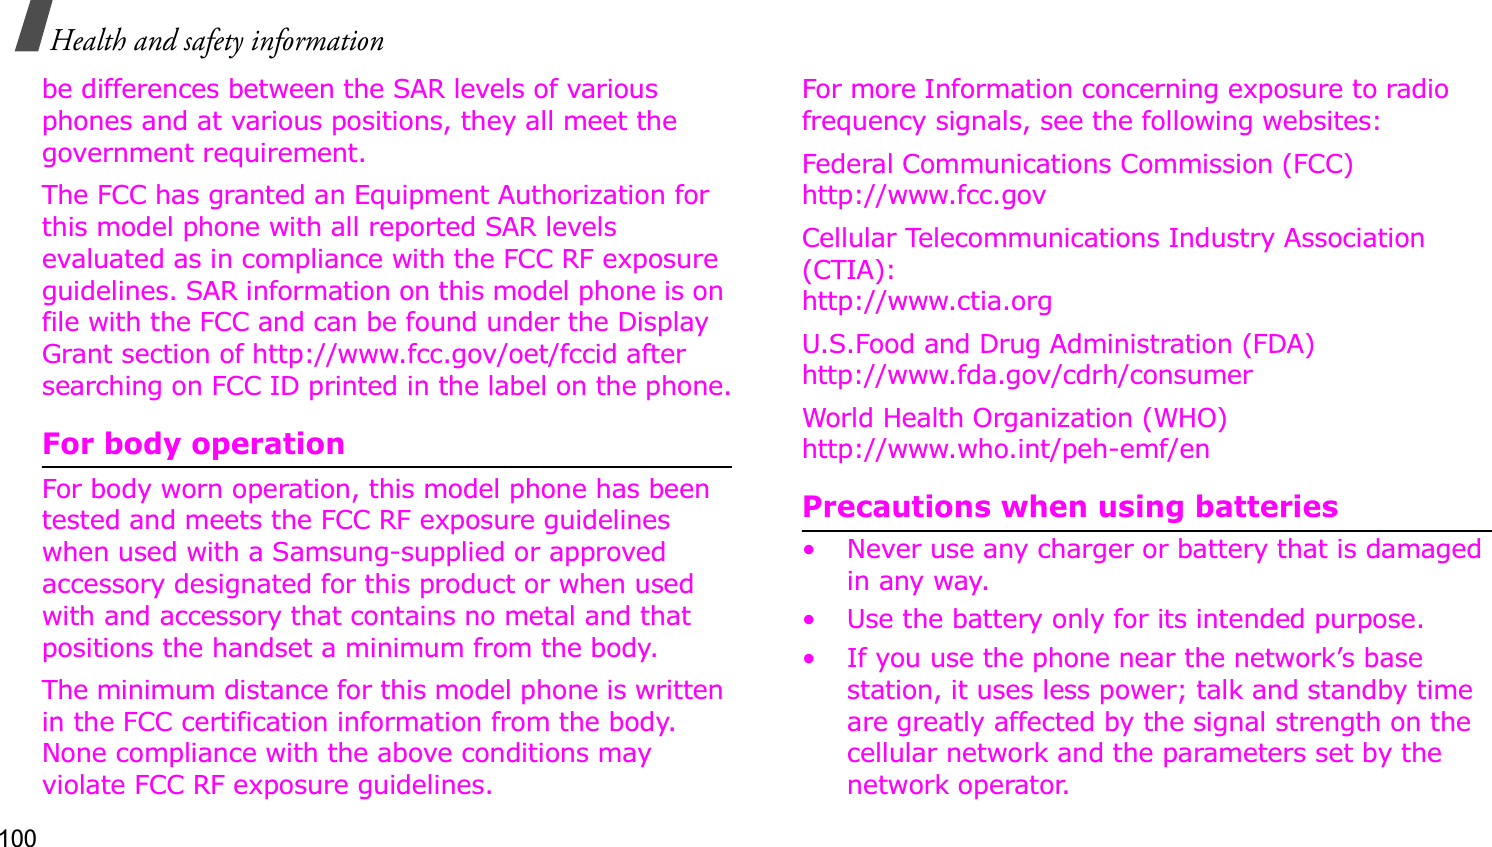 100Health and safety informationbe differences between the SAR levels of various phones and at various positions, they all meet the government requirement.The FCC has granted an Equipment Authorization for this model phone with all reported SAR levels evaluated as in compliance with the FCC RF exposure guidelines. SAR information on this model phone is on file with the FCC and can be found under the Display Grant section of http://www.fcc.gov/oet/fccid after searching on FCC ID printed in the label on the phone.For body operationFor body worn operation, this model phone has been tested and meets the FCC RF exposure guidelines when used with a Samsung-supplied or approved accessory designated for this product or when used with and accessory that contains no metal and that positions the handset a minimum from the body. The minimum distance for this model phone is written in the FCC certification information from the body. None compliance with the above conditions may violate FCC RF exposure guidelines. For more Information concerning exposure to radio frequency signals, see the following websites:Federal Communications Commission (FCC)http://www.fcc.govCellular Telecommunications Industry Association (CTIA):http://www.ctia.orgU.S.Food and Drug Administration (FDA)http://www.fda.gov/cdrh/consumerWorld Health Organization (WHO)http://www.who.int/peh-emf/enPrecautions when using batteries• Never use any charger or battery that is damaged in any way.• Use the battery only for its intended purpose.• If you use the phone near the network’s base station, it uses less power; talk and standby time are greatly affected by the signal strength on the cellular network and the parameters set by the network operator.